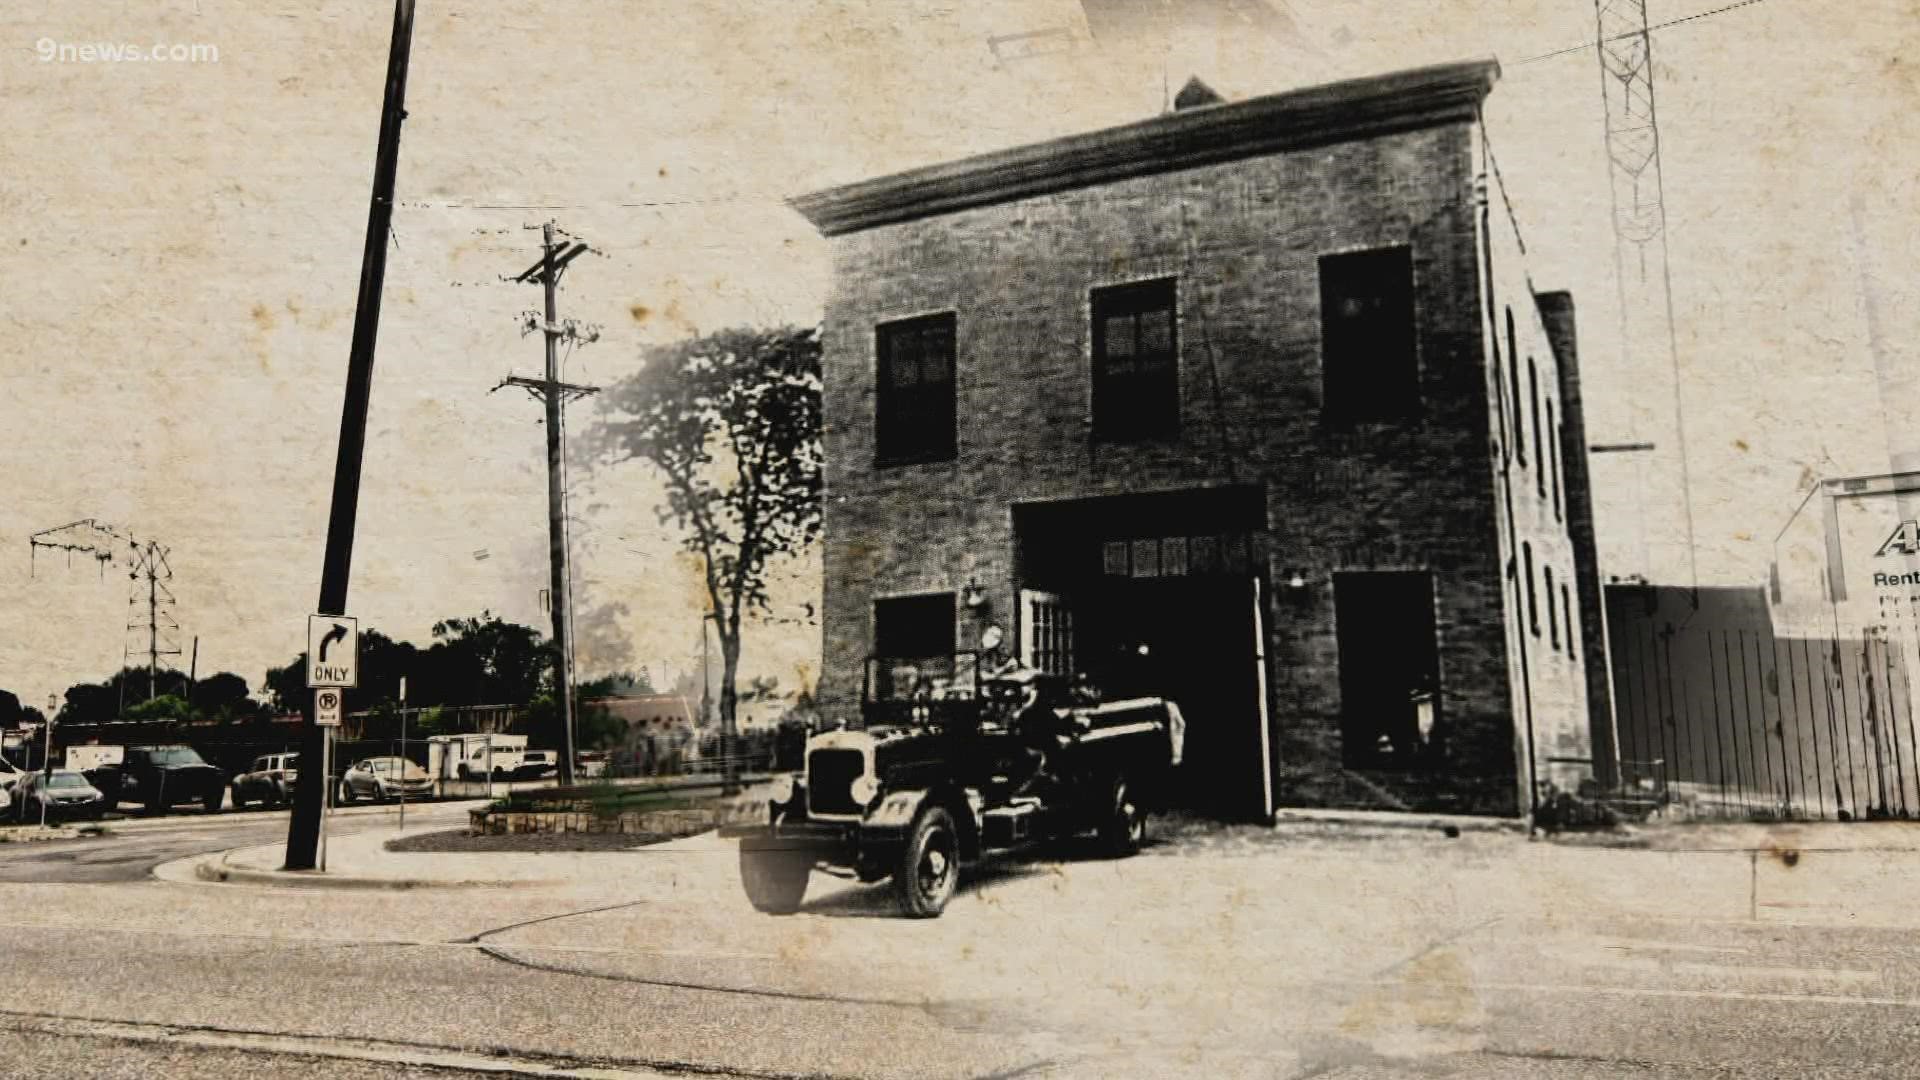 African-American firefighters work to save the history of Station 24, Minneapolis's first all-Black fire station, for future generations.